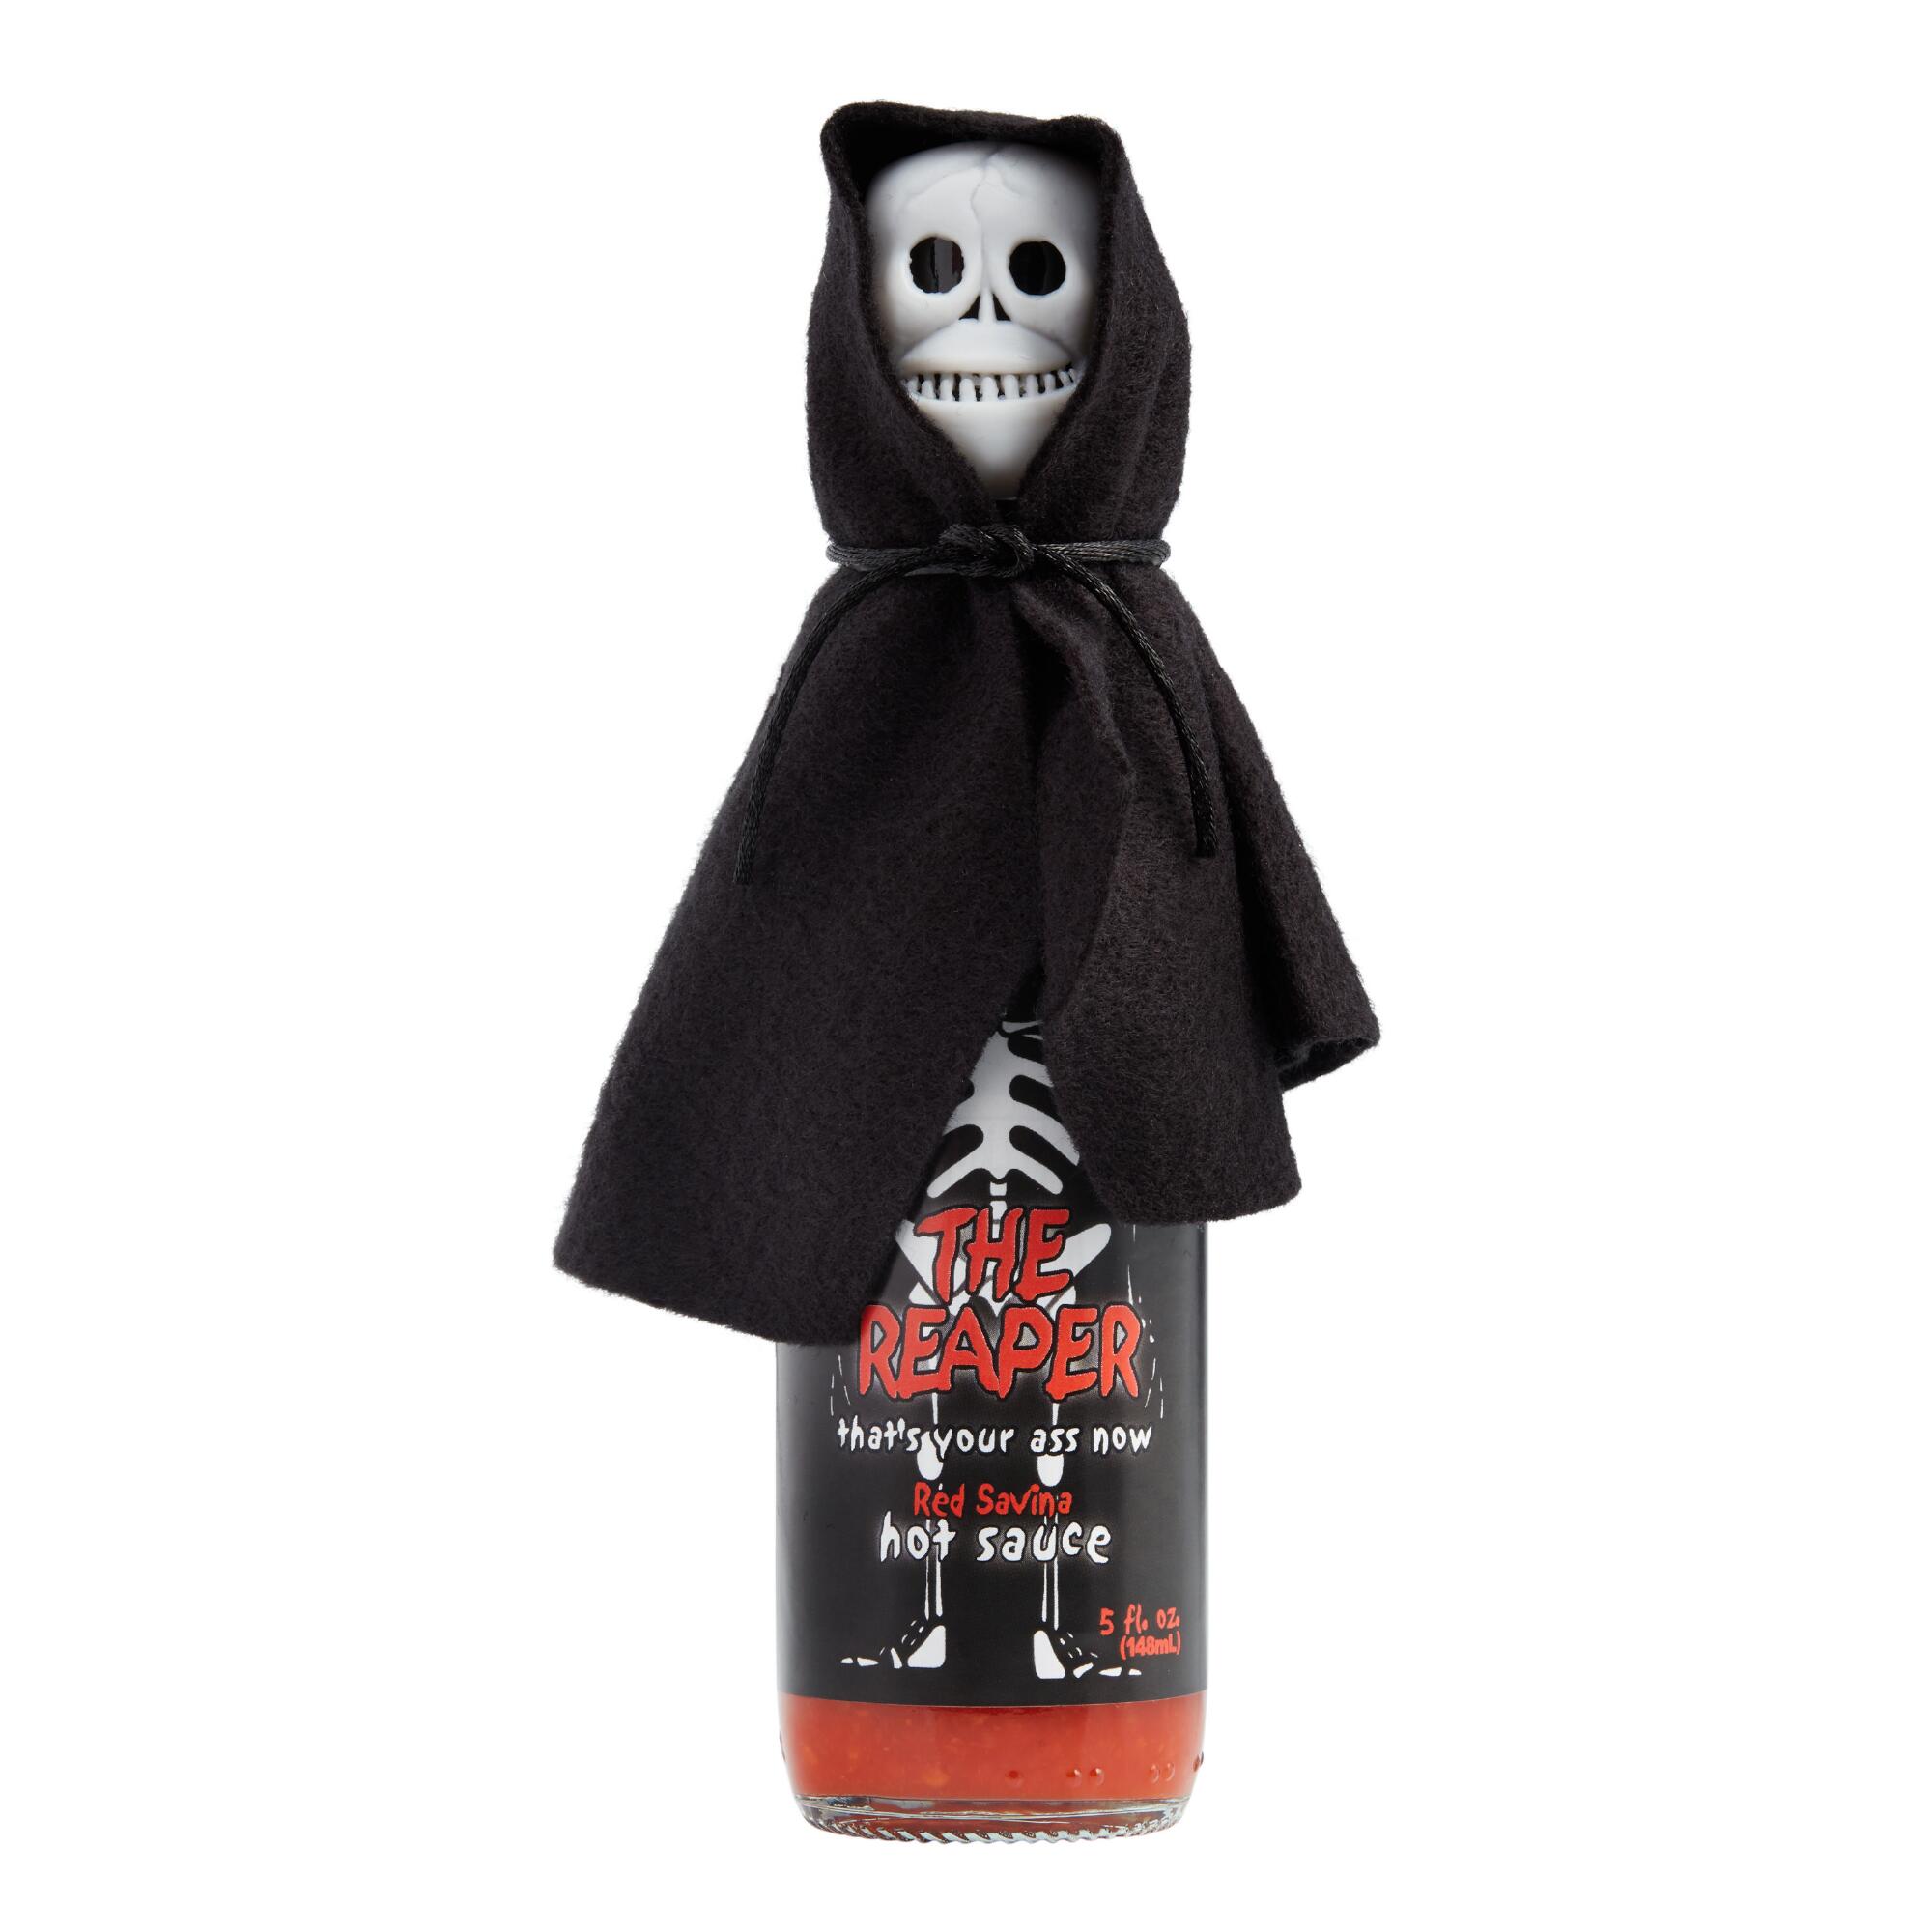 The Reaper Hot Sauce by World Market